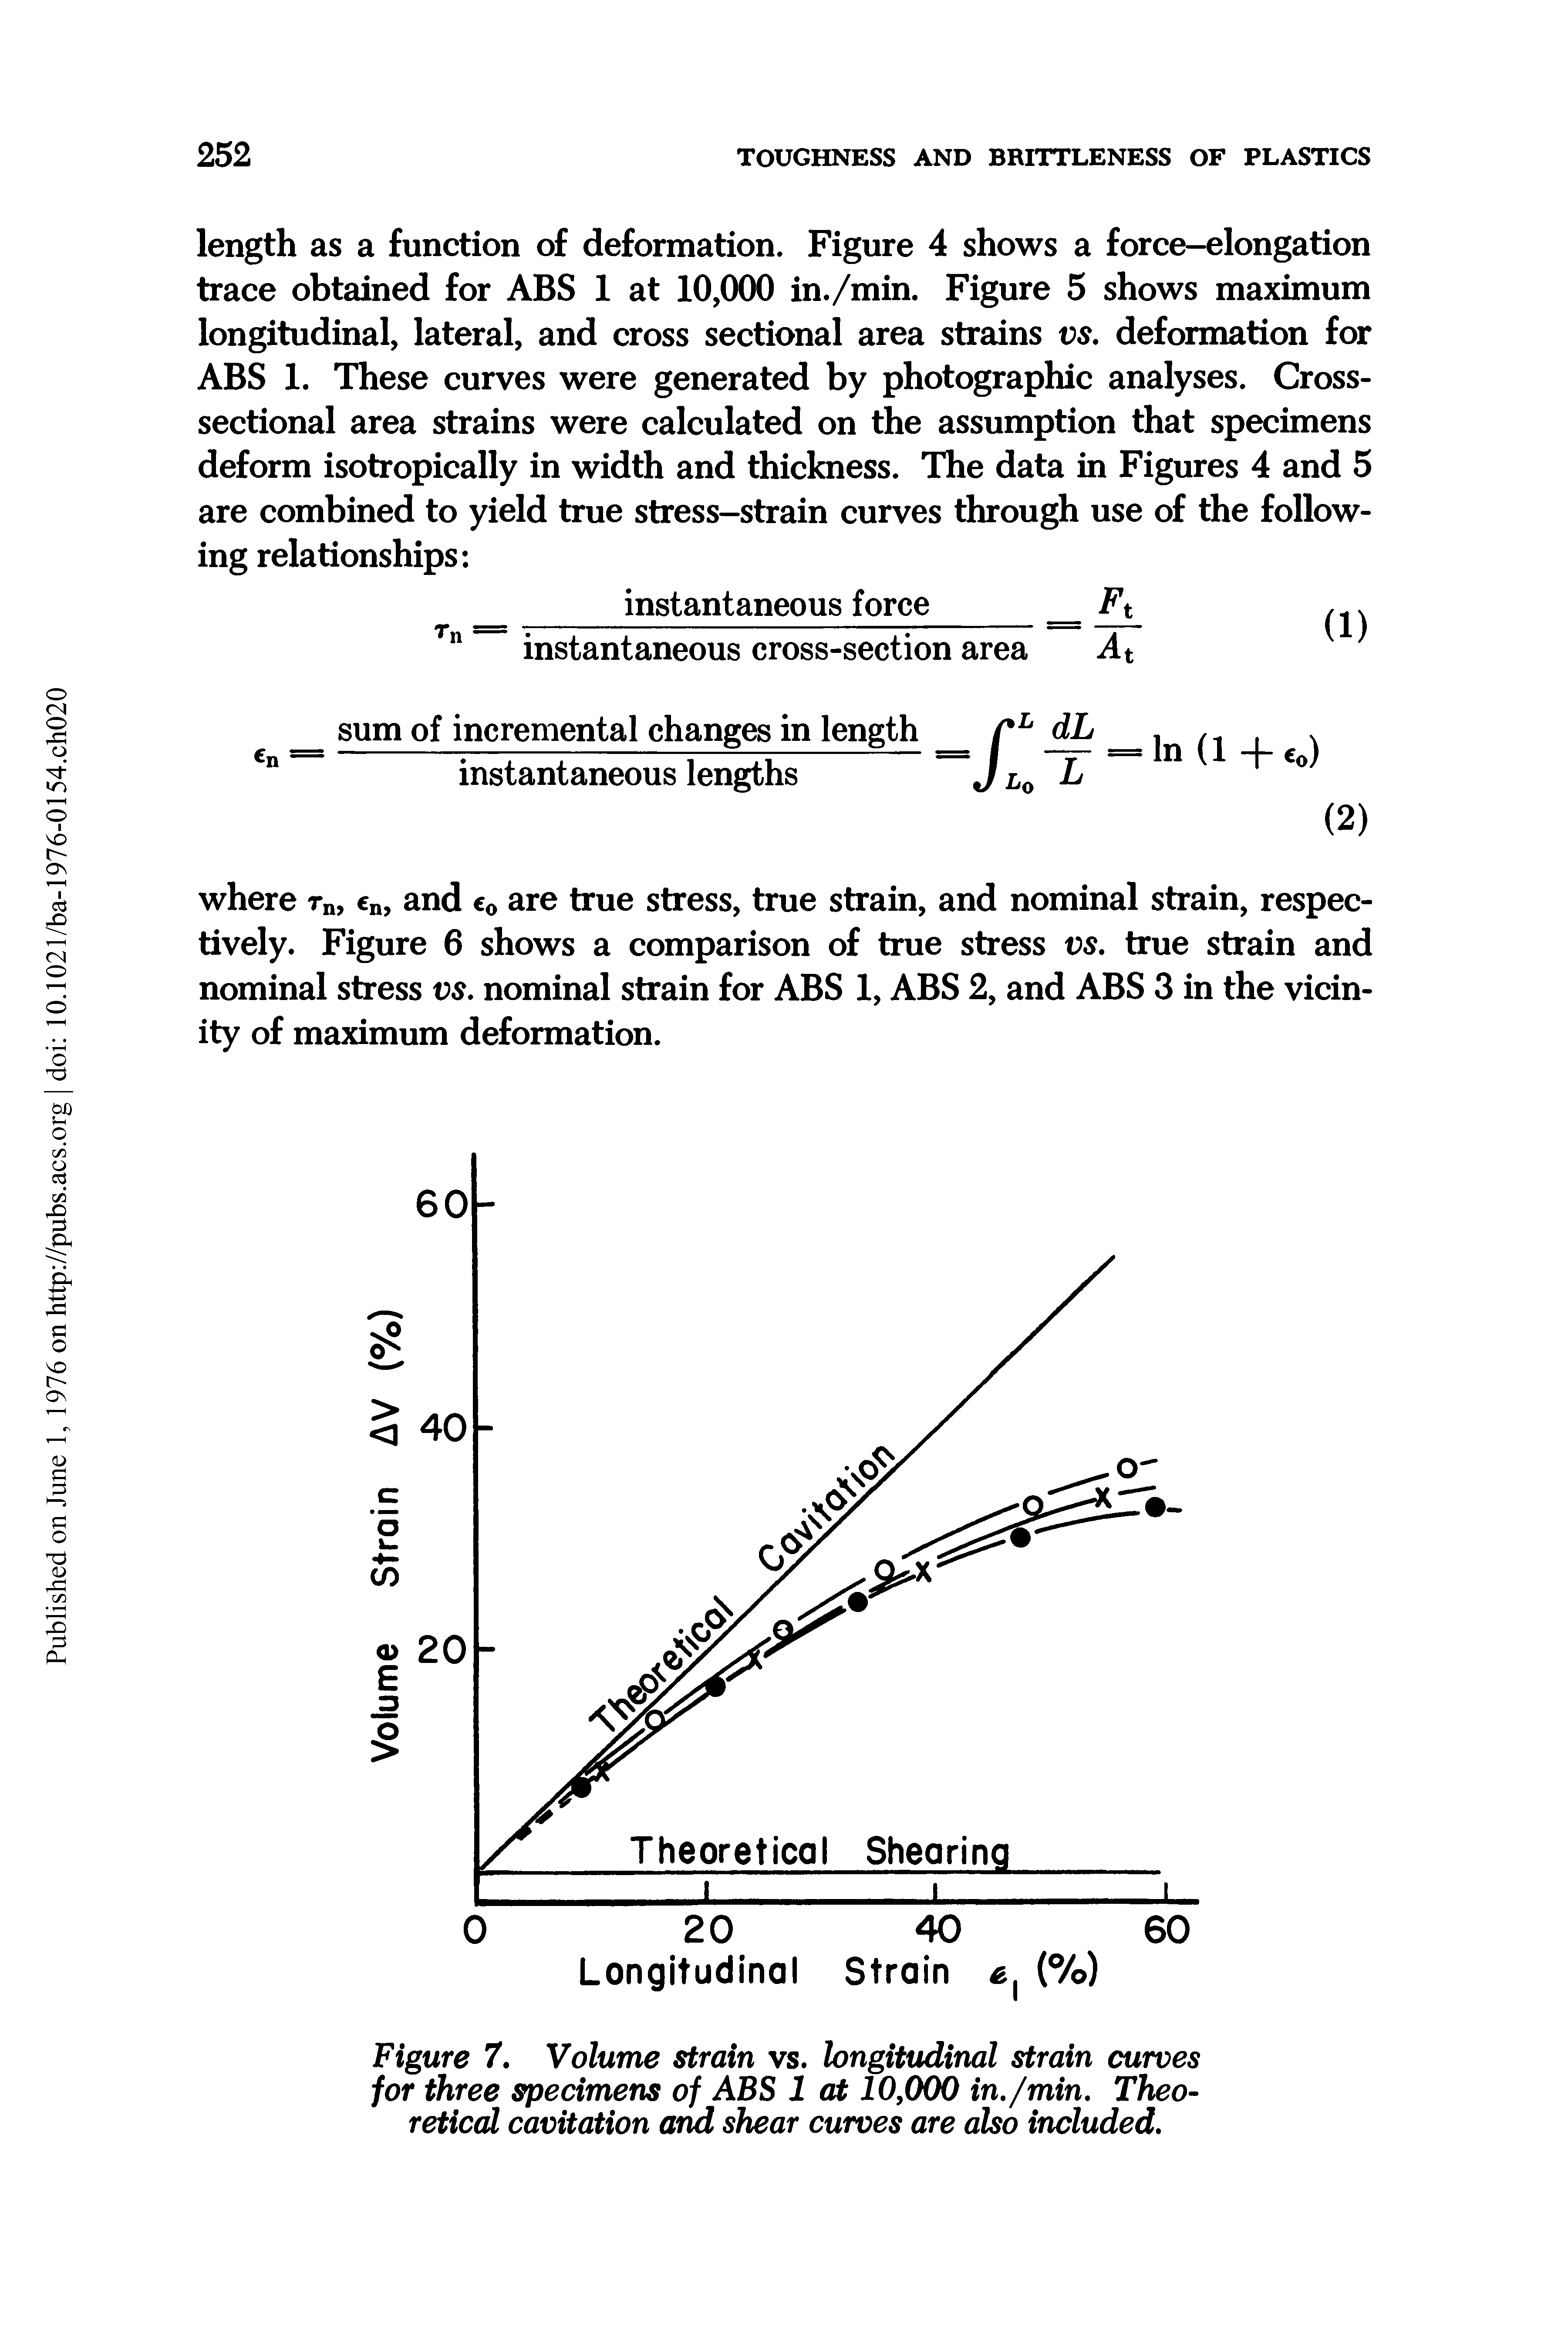 Figure 7. Volume strain vs. longitudinal strain curves for three specimens of ABS 1 at 10,000 in./min. Theoretical cavitation and shear curves are also included.